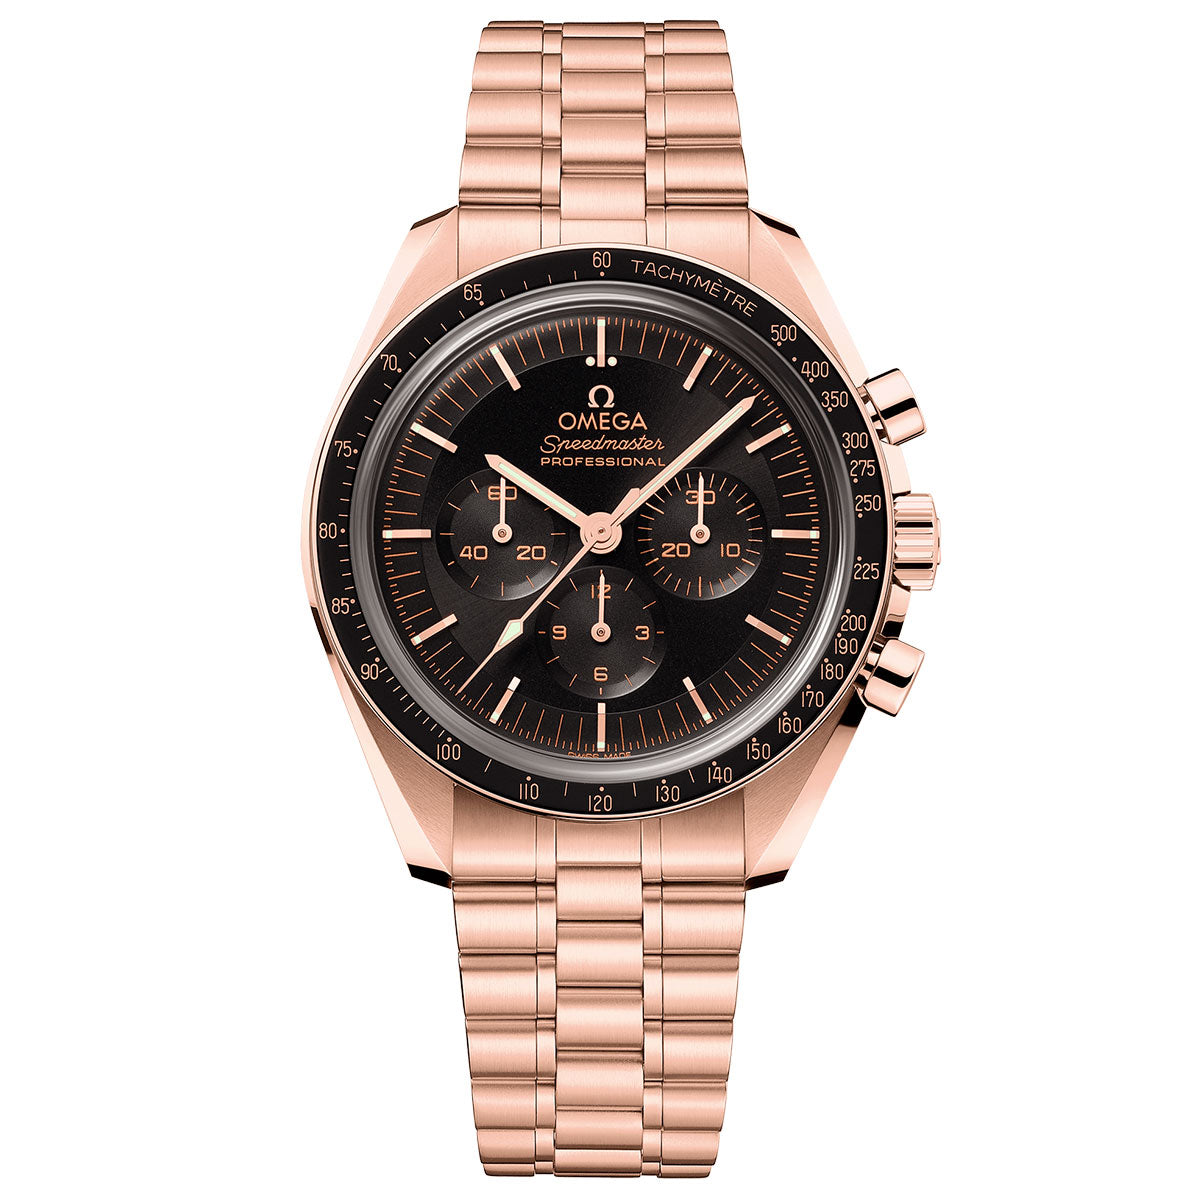 OMEGA Speedmaster Moonwatch Professional Co-Axial Master Chronometer Chronograph 42mm Watch